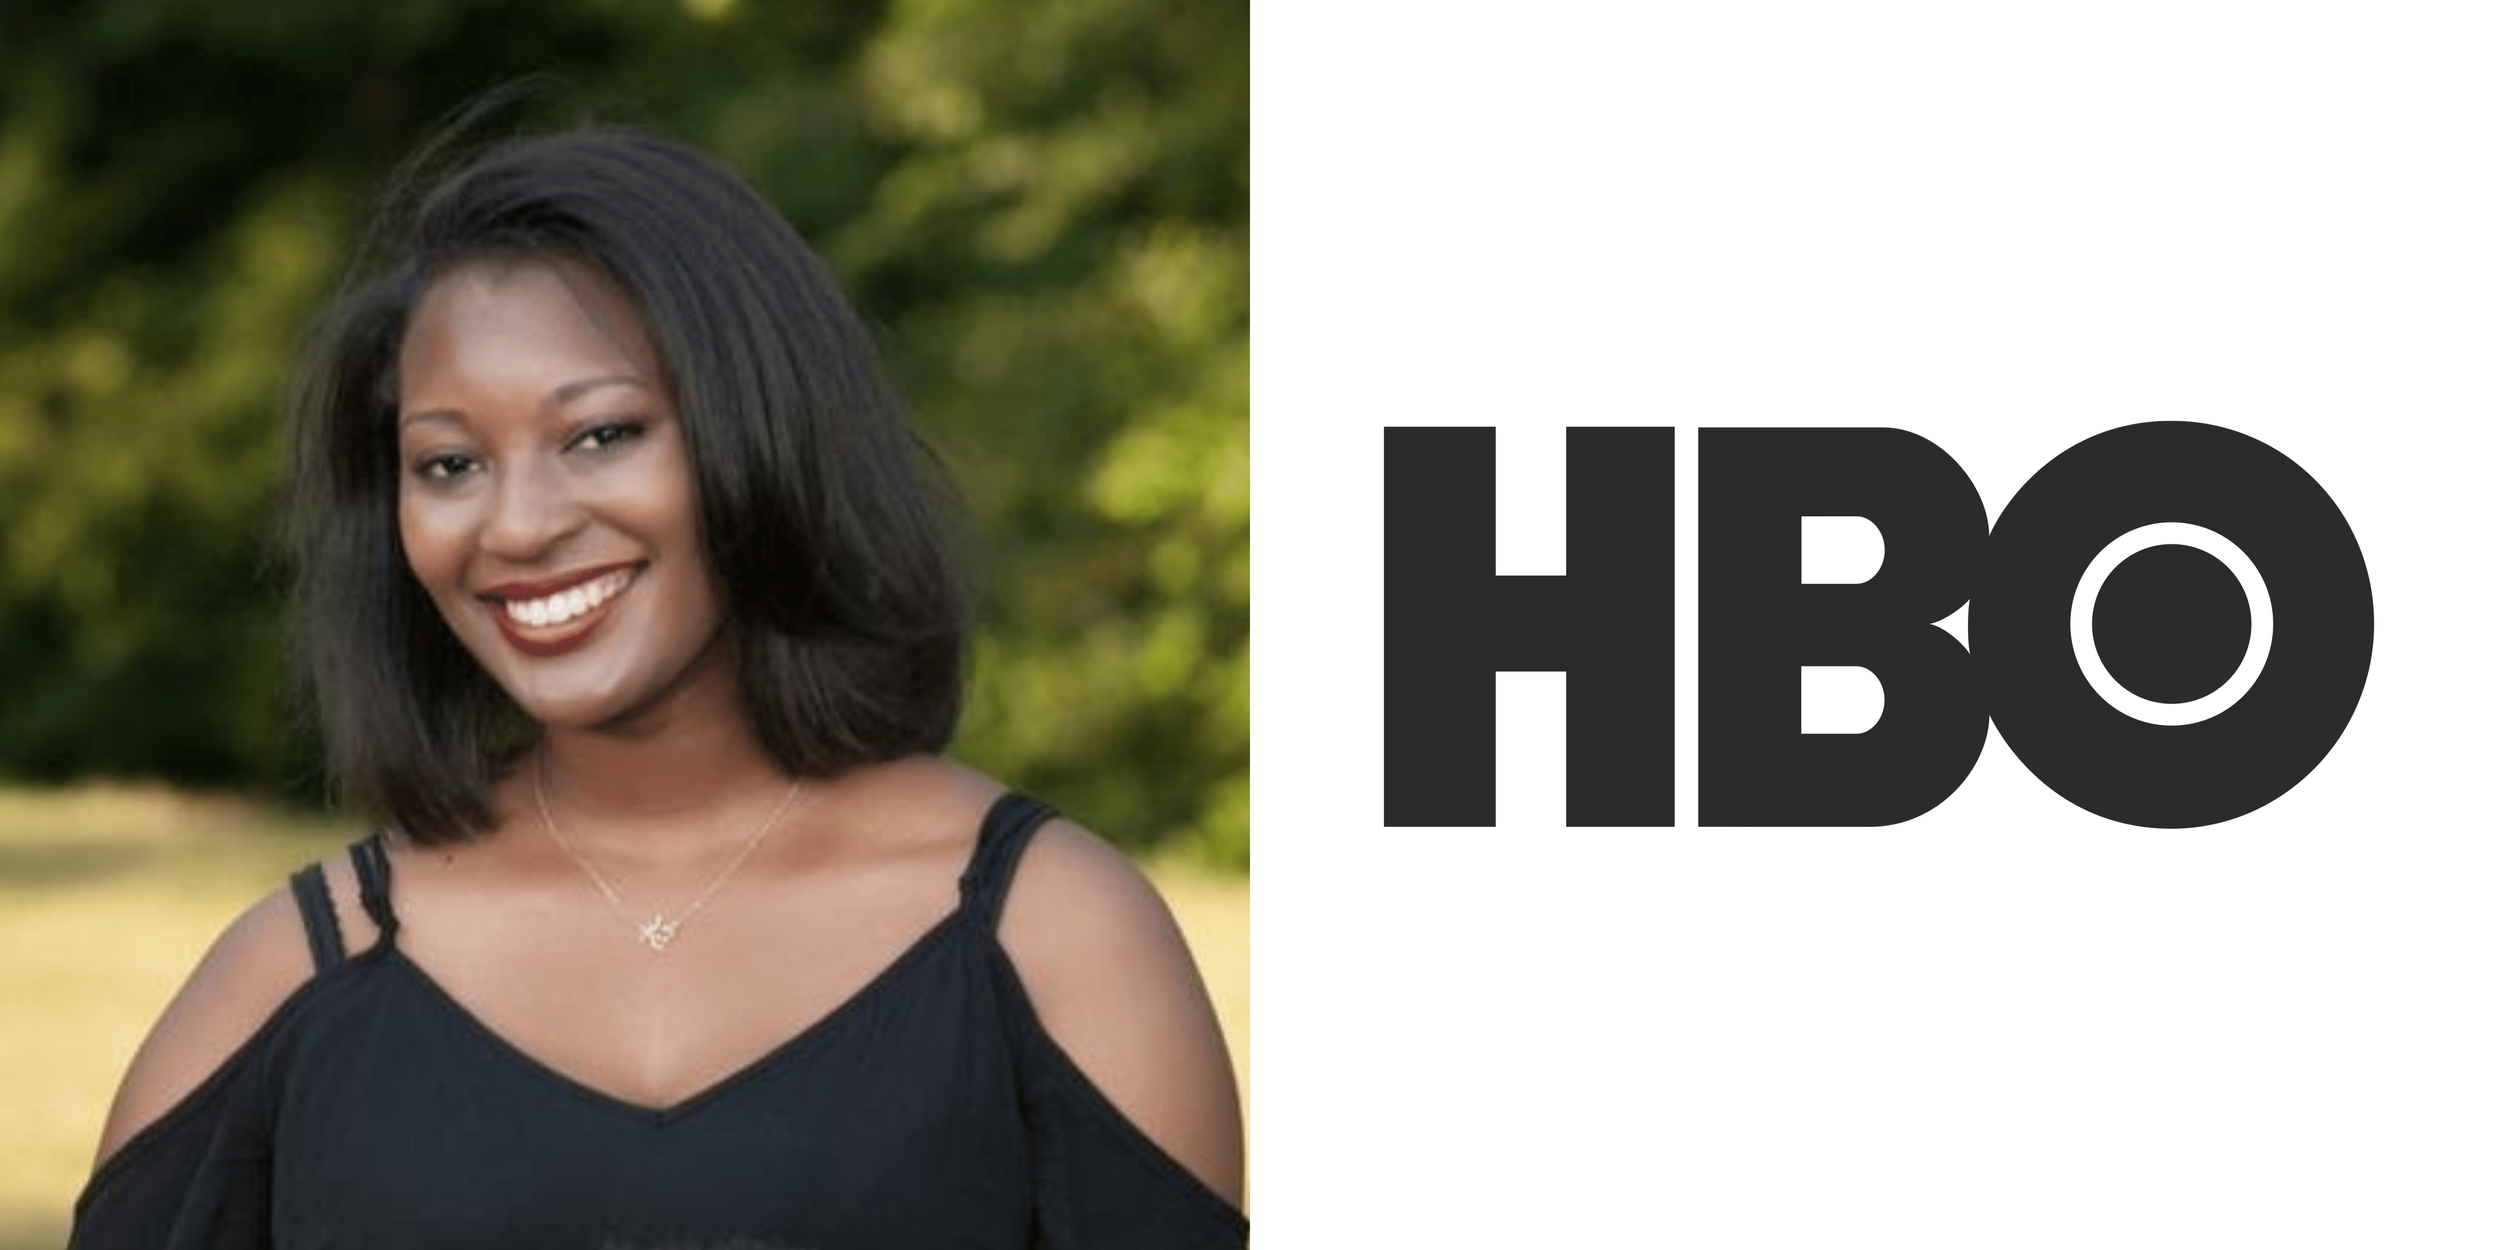  Kanisha Williams was hired as a Script Coordinator on an HBO show.  